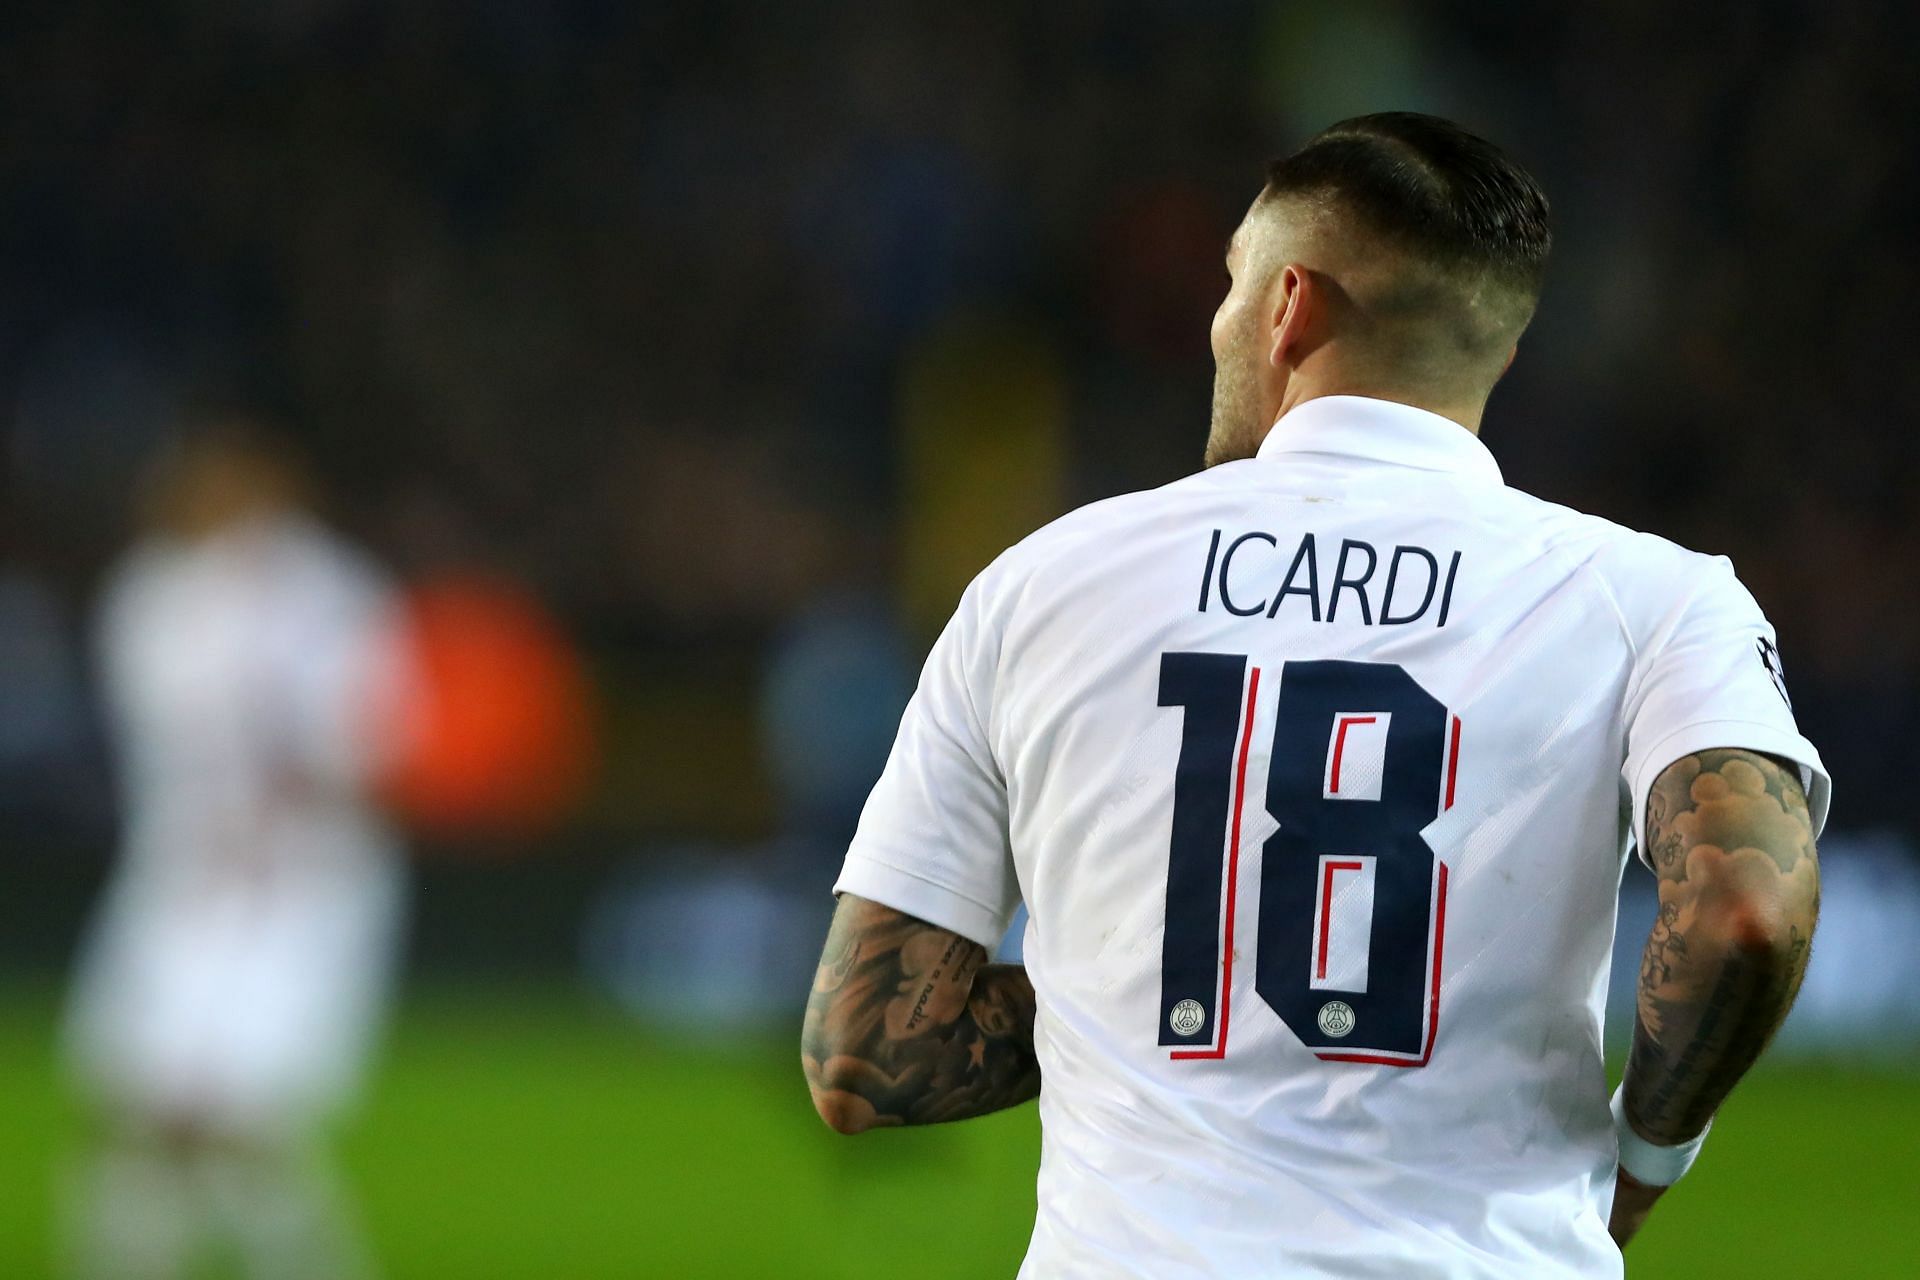 Arsenal could have benefited from Icardi&#039;s goalscoring know-how